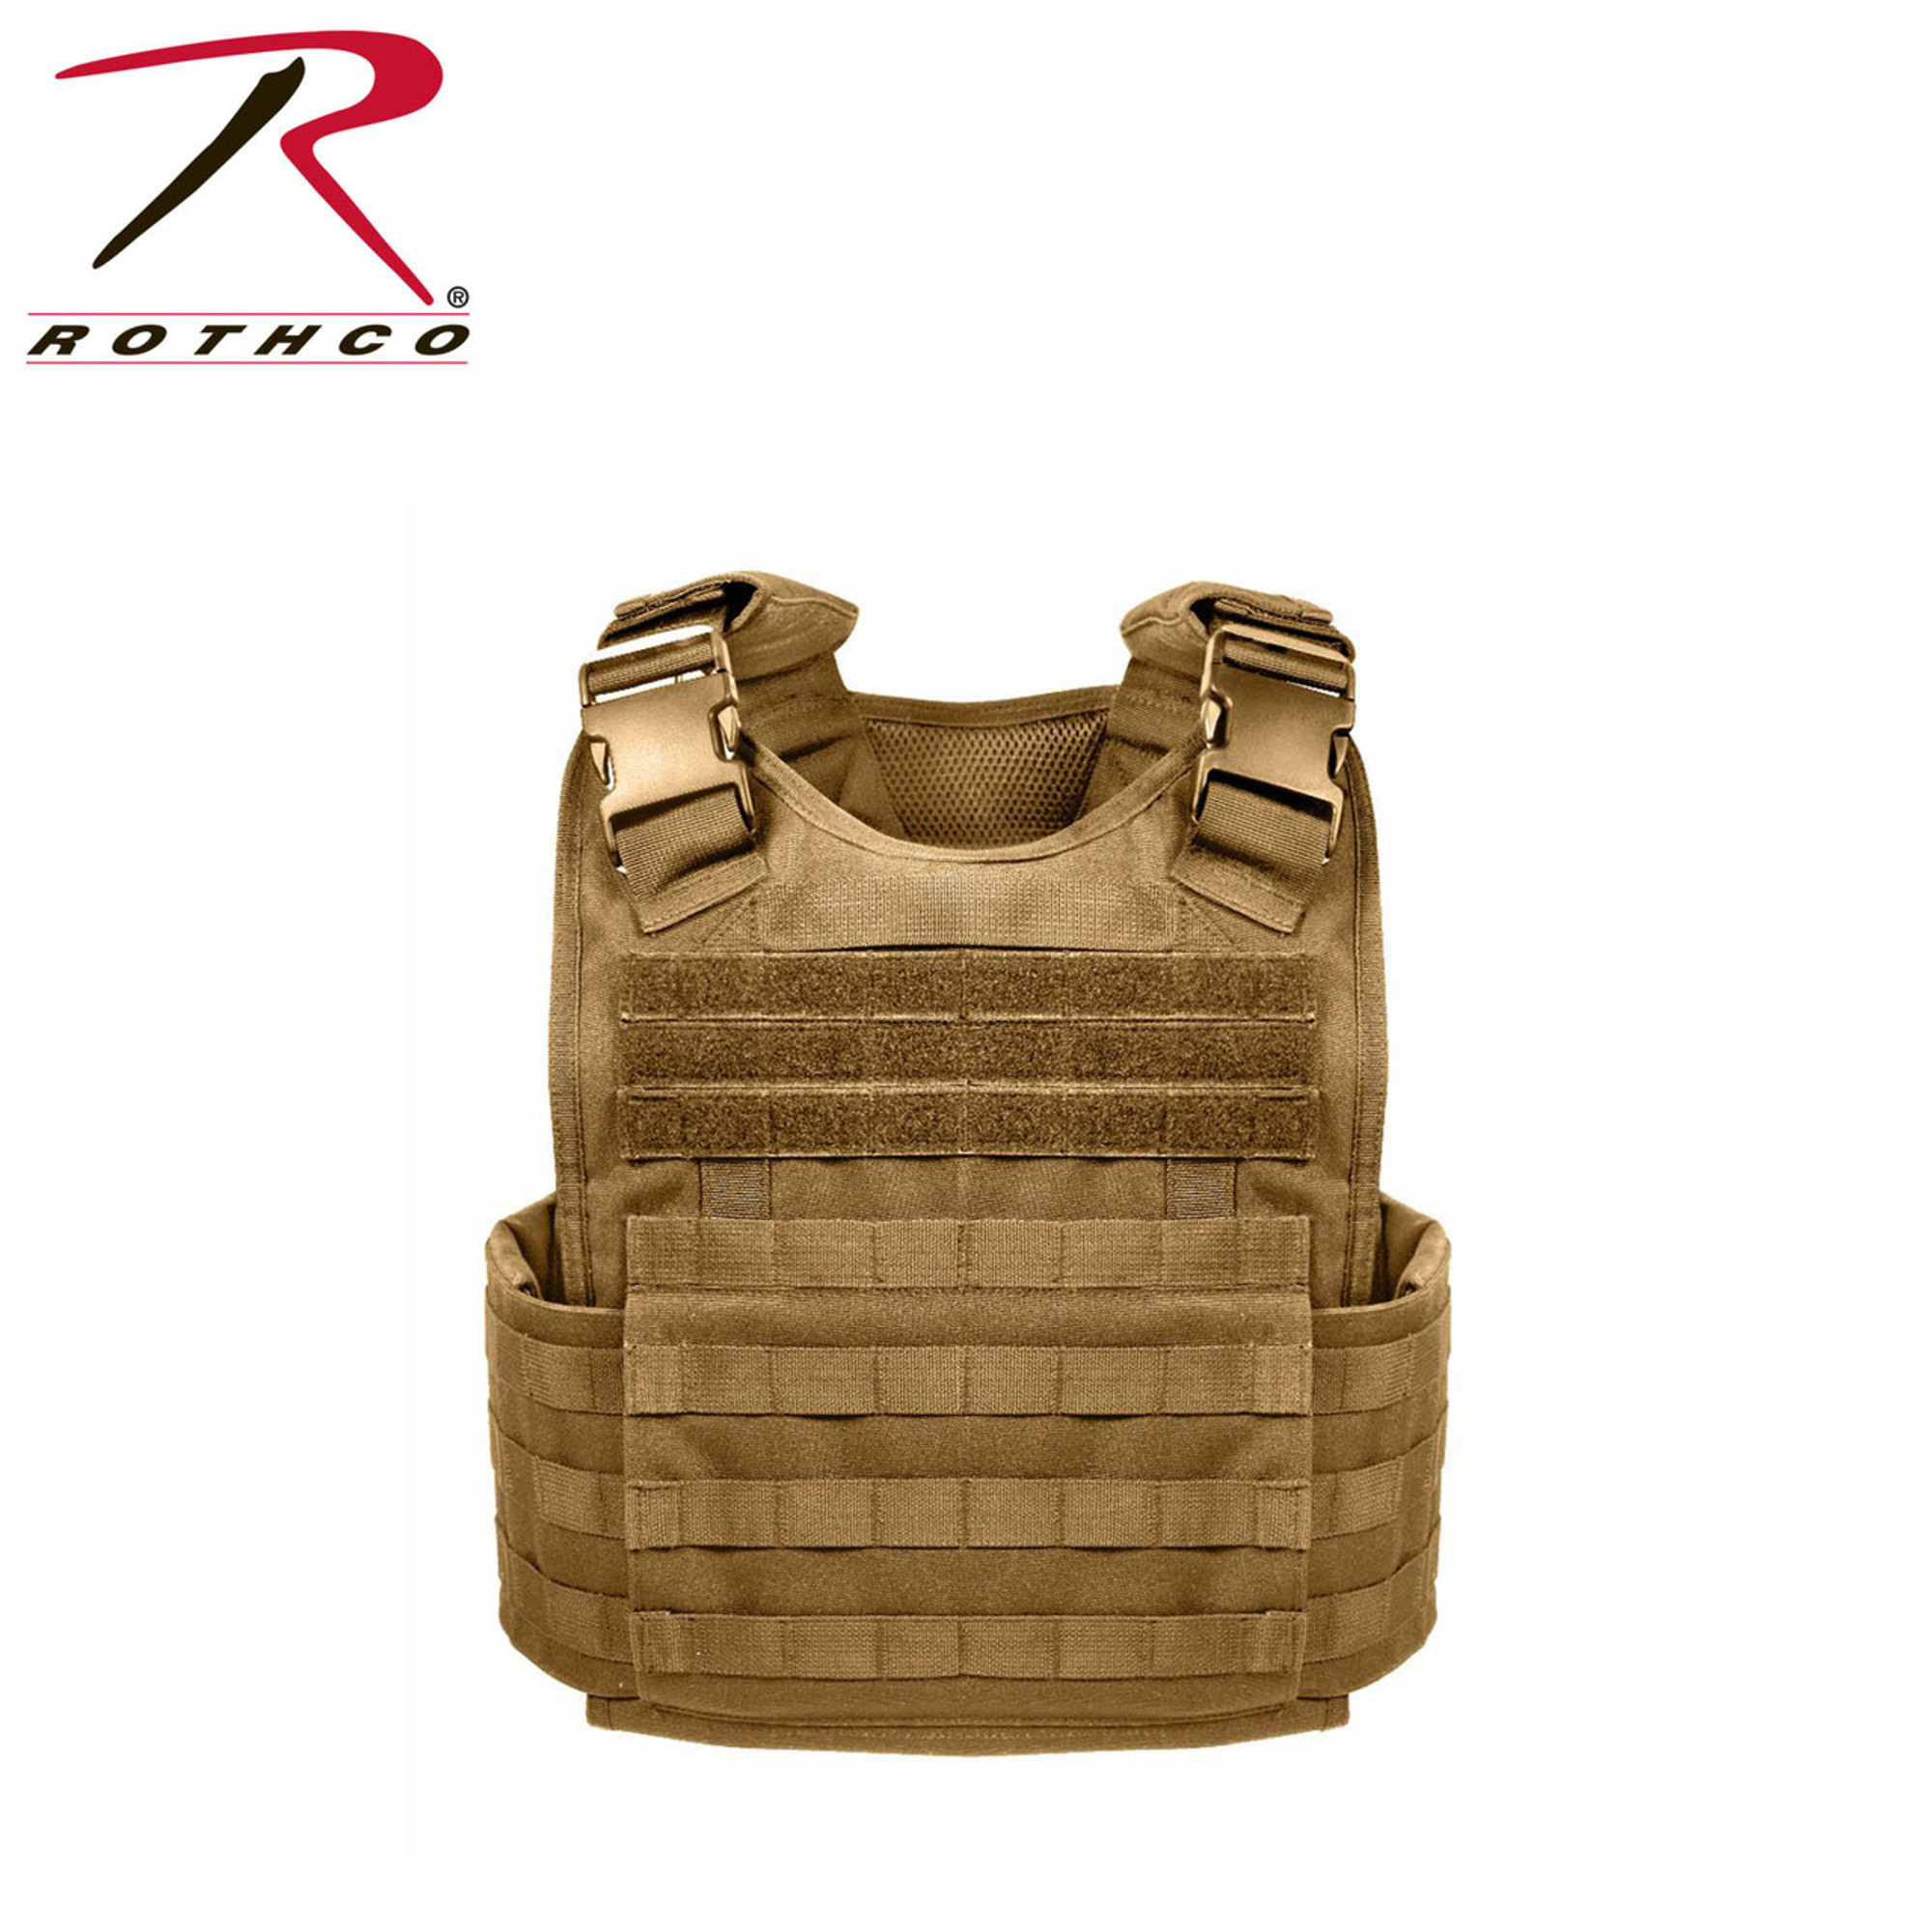 Rothco MOLLE Plate Carrier Vest - Coyote Brown